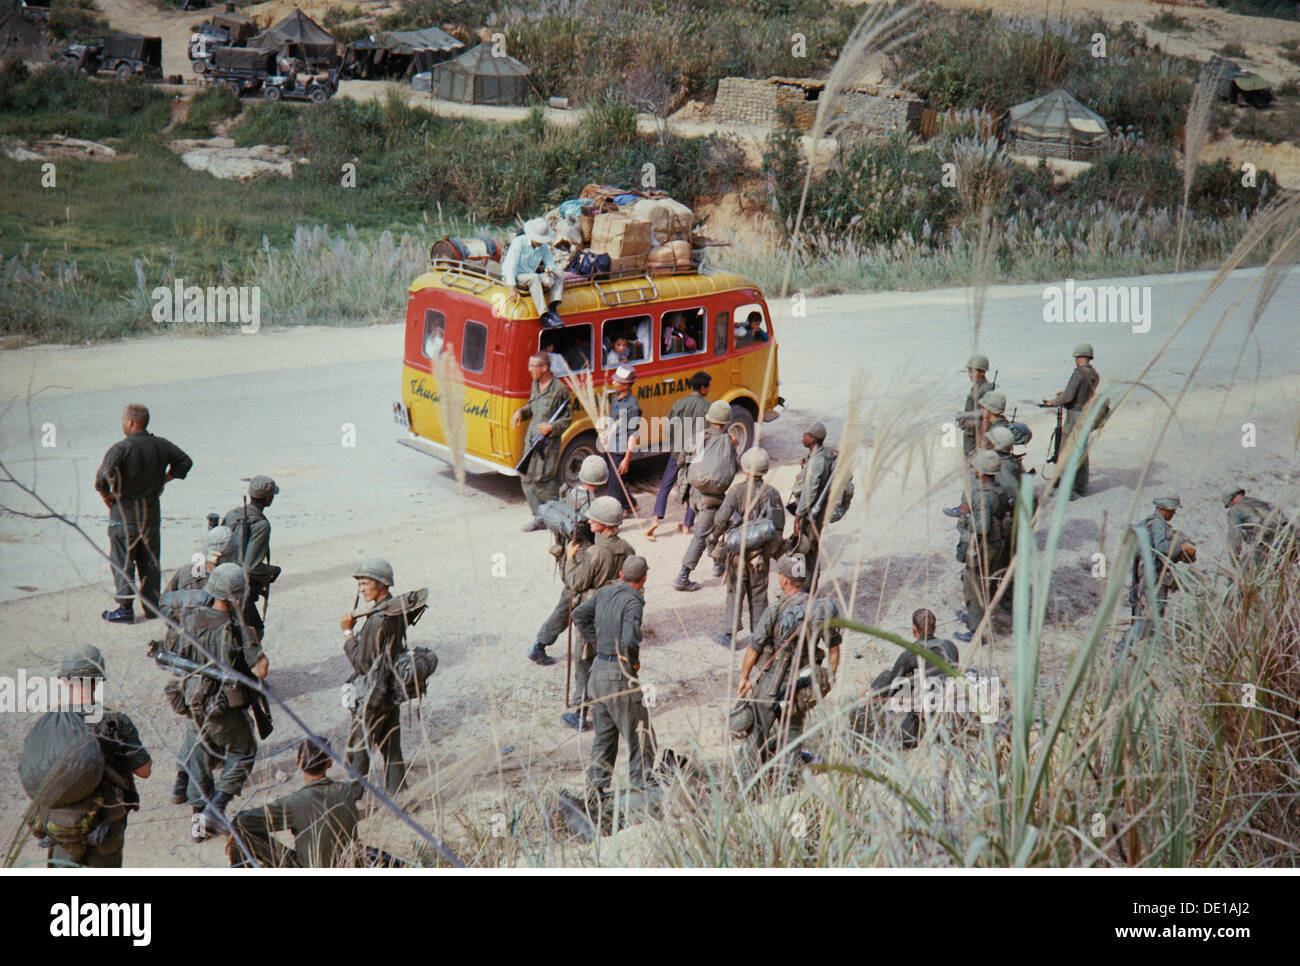 Vietnam War 1957 - 1975, American soldiers and Vietnamese minibus on a road near a bivouac, South Vietnam, 1965, camp, camps, tent, tents, transport, transportation, buses, busses, military, Armed Forces, army, armies, USA, United States of America, South-East Asia, South East Asia, Southeast Asia, Far East, Viet Nam conflict, Viet Nam, Vietnam, war, wars, conflict, conflicts, 1960s, 60s, 20th century, people, group, groups, soldiers, soldier, minibus, mini bus, road, roads, historic, historical, Additional-Rights-Clearences-Not Available Stock Photo